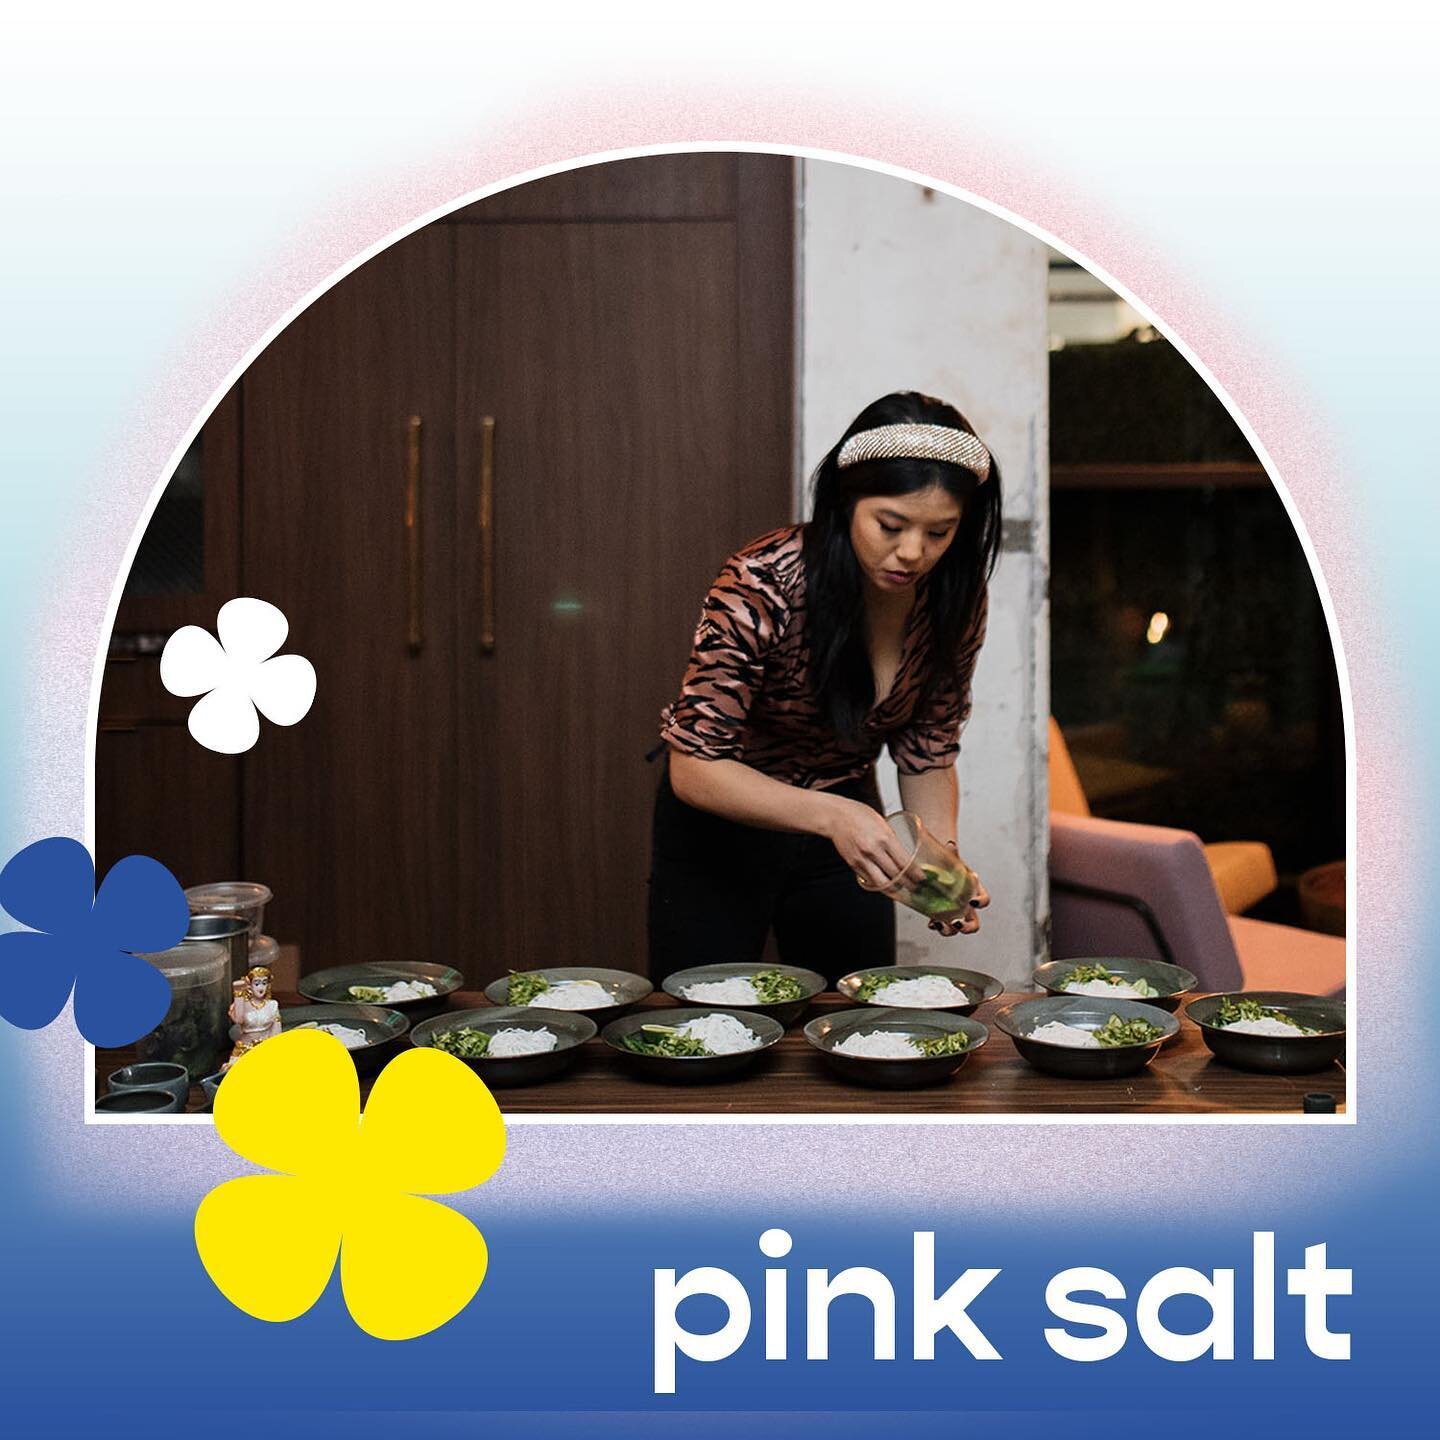 A tale as old as time for many a first gen child, Palita Sriratana was one just of few Asian kids in the central Illinois town she grew up in. Cooking Thai cuisine and filling her kitchen with the tastes and smells from her family&rsquo;s home back i